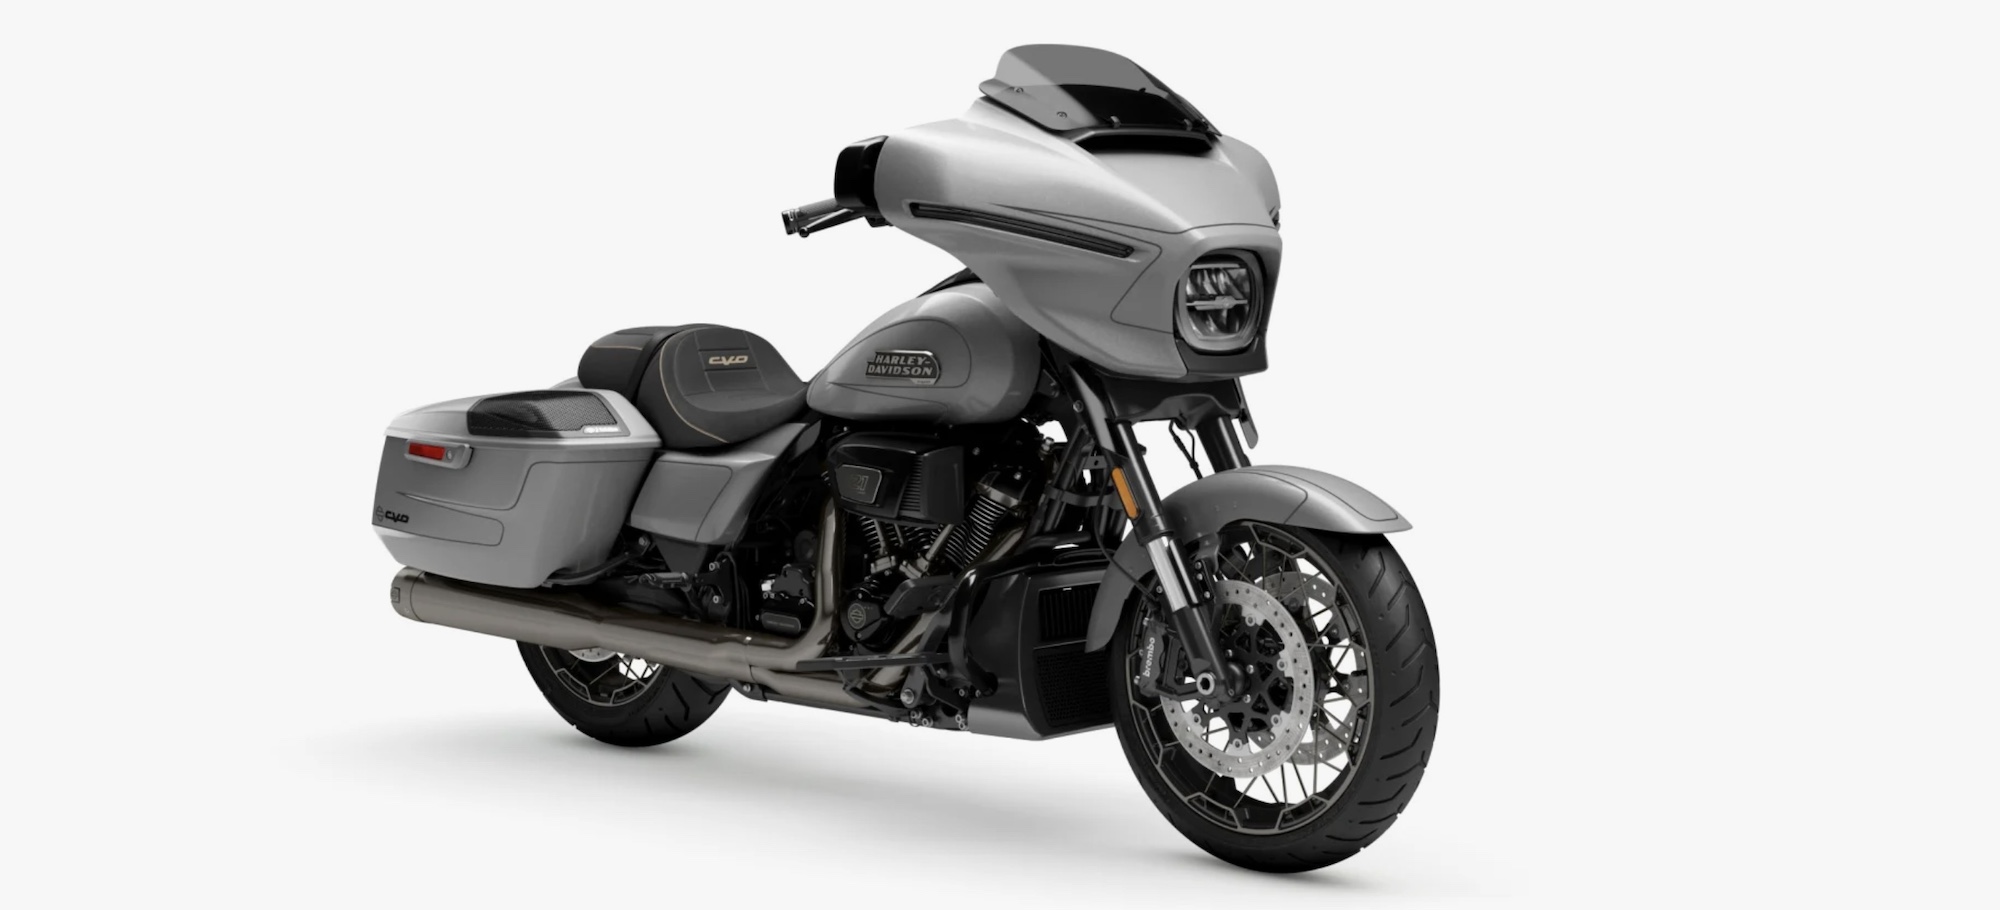 A front quarter view of Harley-Davidson’s 2023 Street Glide CVO motorcycle.